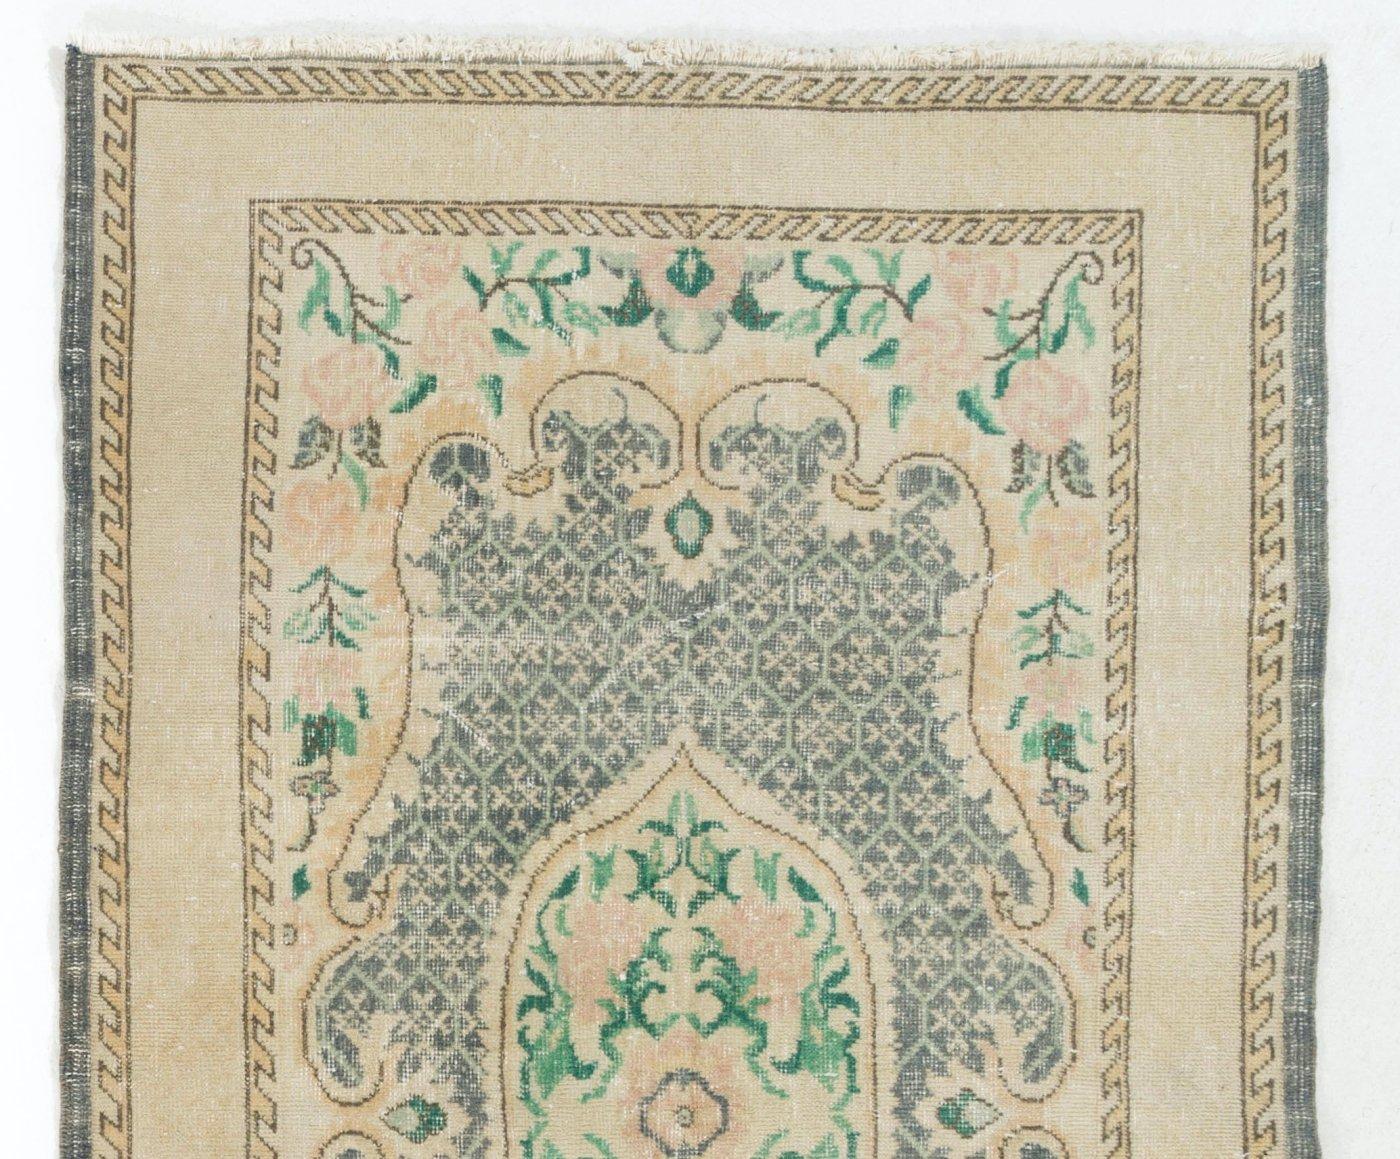 Vintage Turkish area rug with a French-Aubusson inspired romantic design of a central floral cartouche in pink and emerald green and corner pieces decorated with large pink roses against a dark indigo field with all-over honeycomb motifs that also